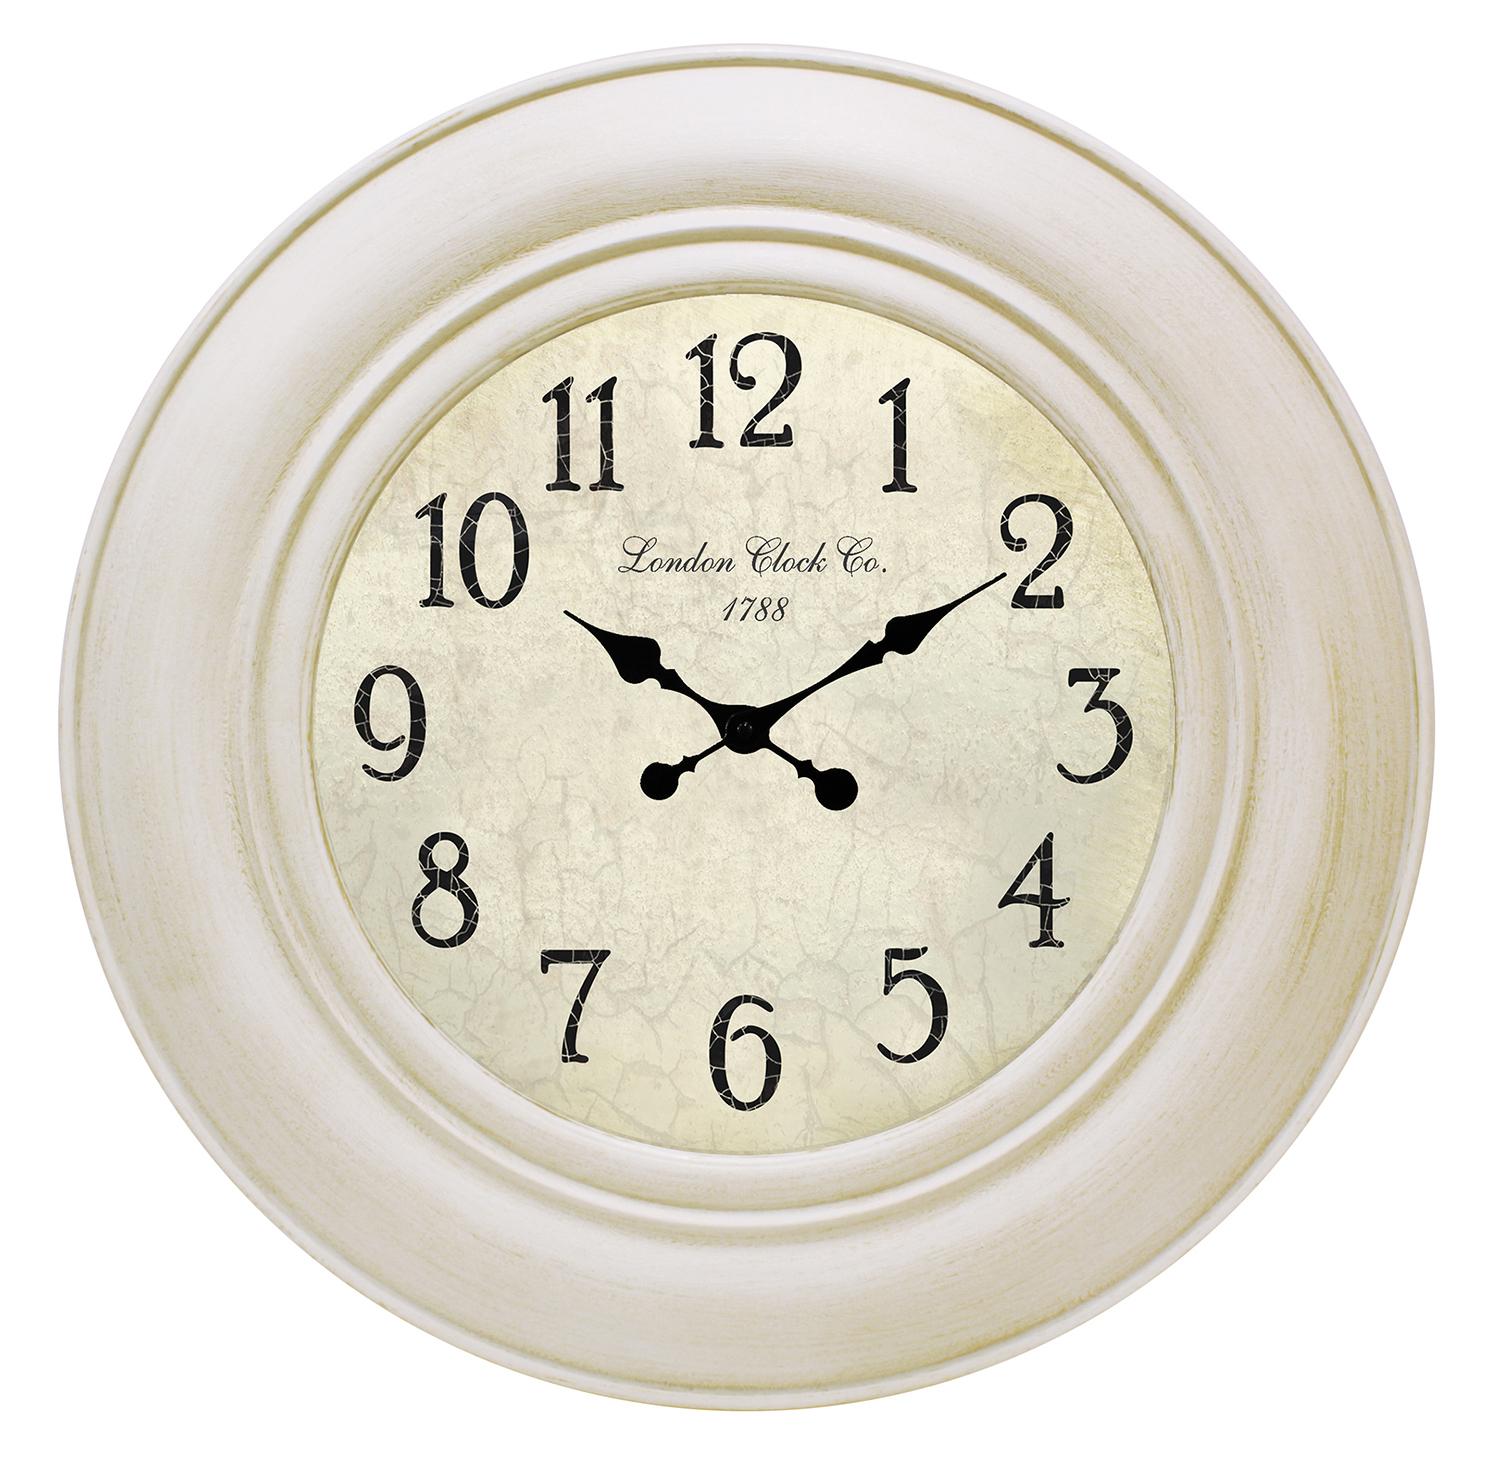 75cm Wall Clock With Antique Feature Design, Victorian Style